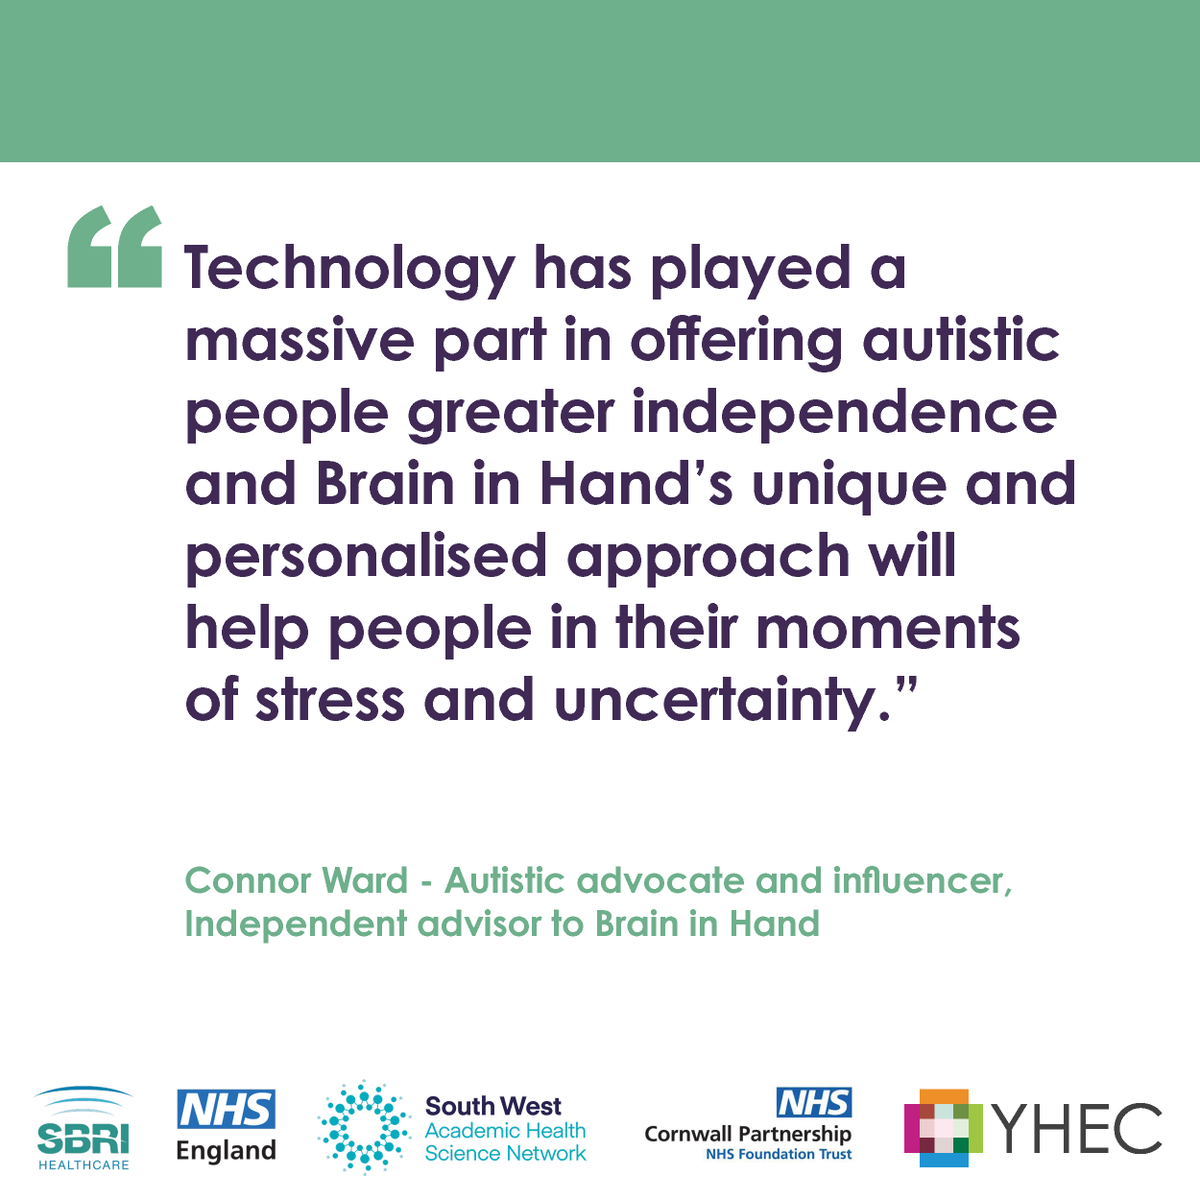 Co-production was at the heart of the Brain in Hand study. We would like to thank the Autistic community for owning, guiding and inspiring the direction for this research. Full findings: hubs.li/Q01pjDs70 @brain_in_hand @haritsa1 @sbrihealthcare